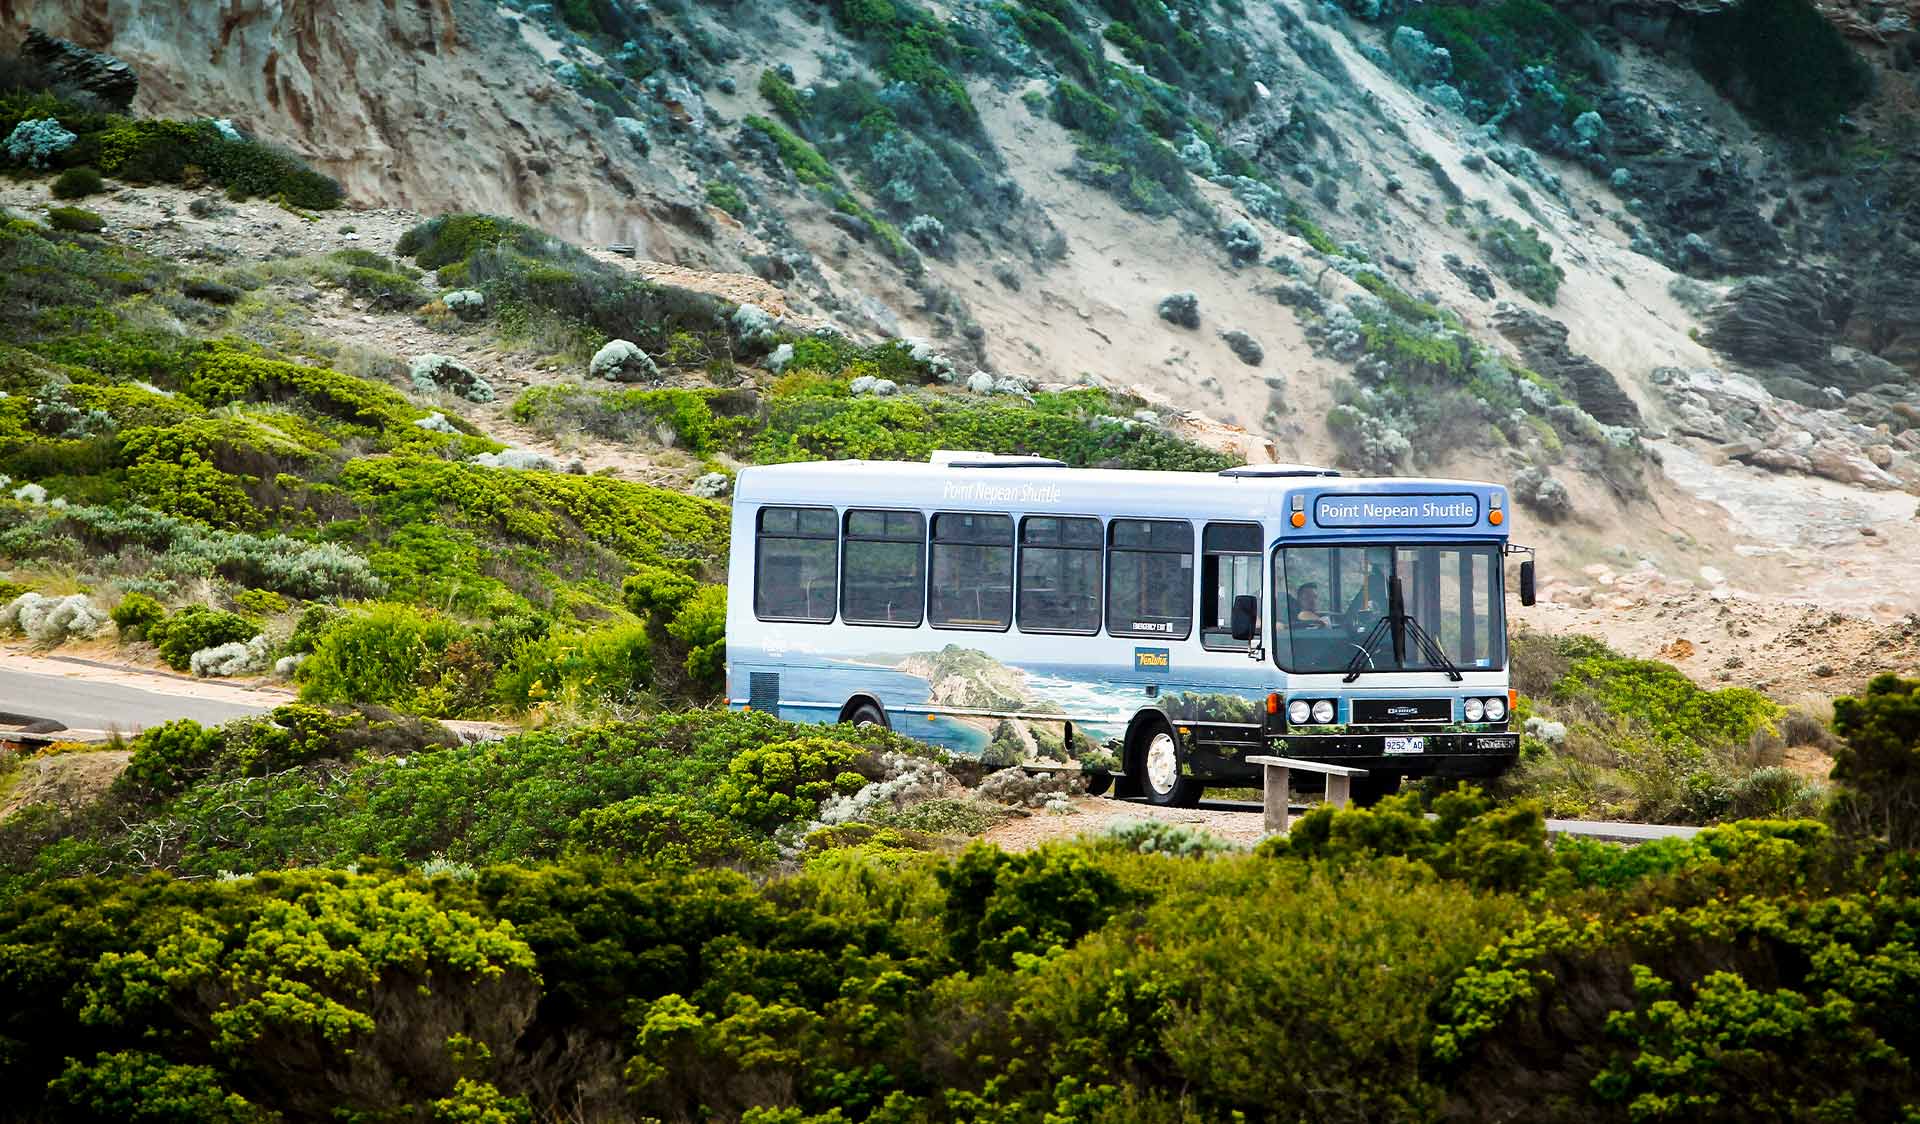 Wide shot of a bus on a road surrounded by nature